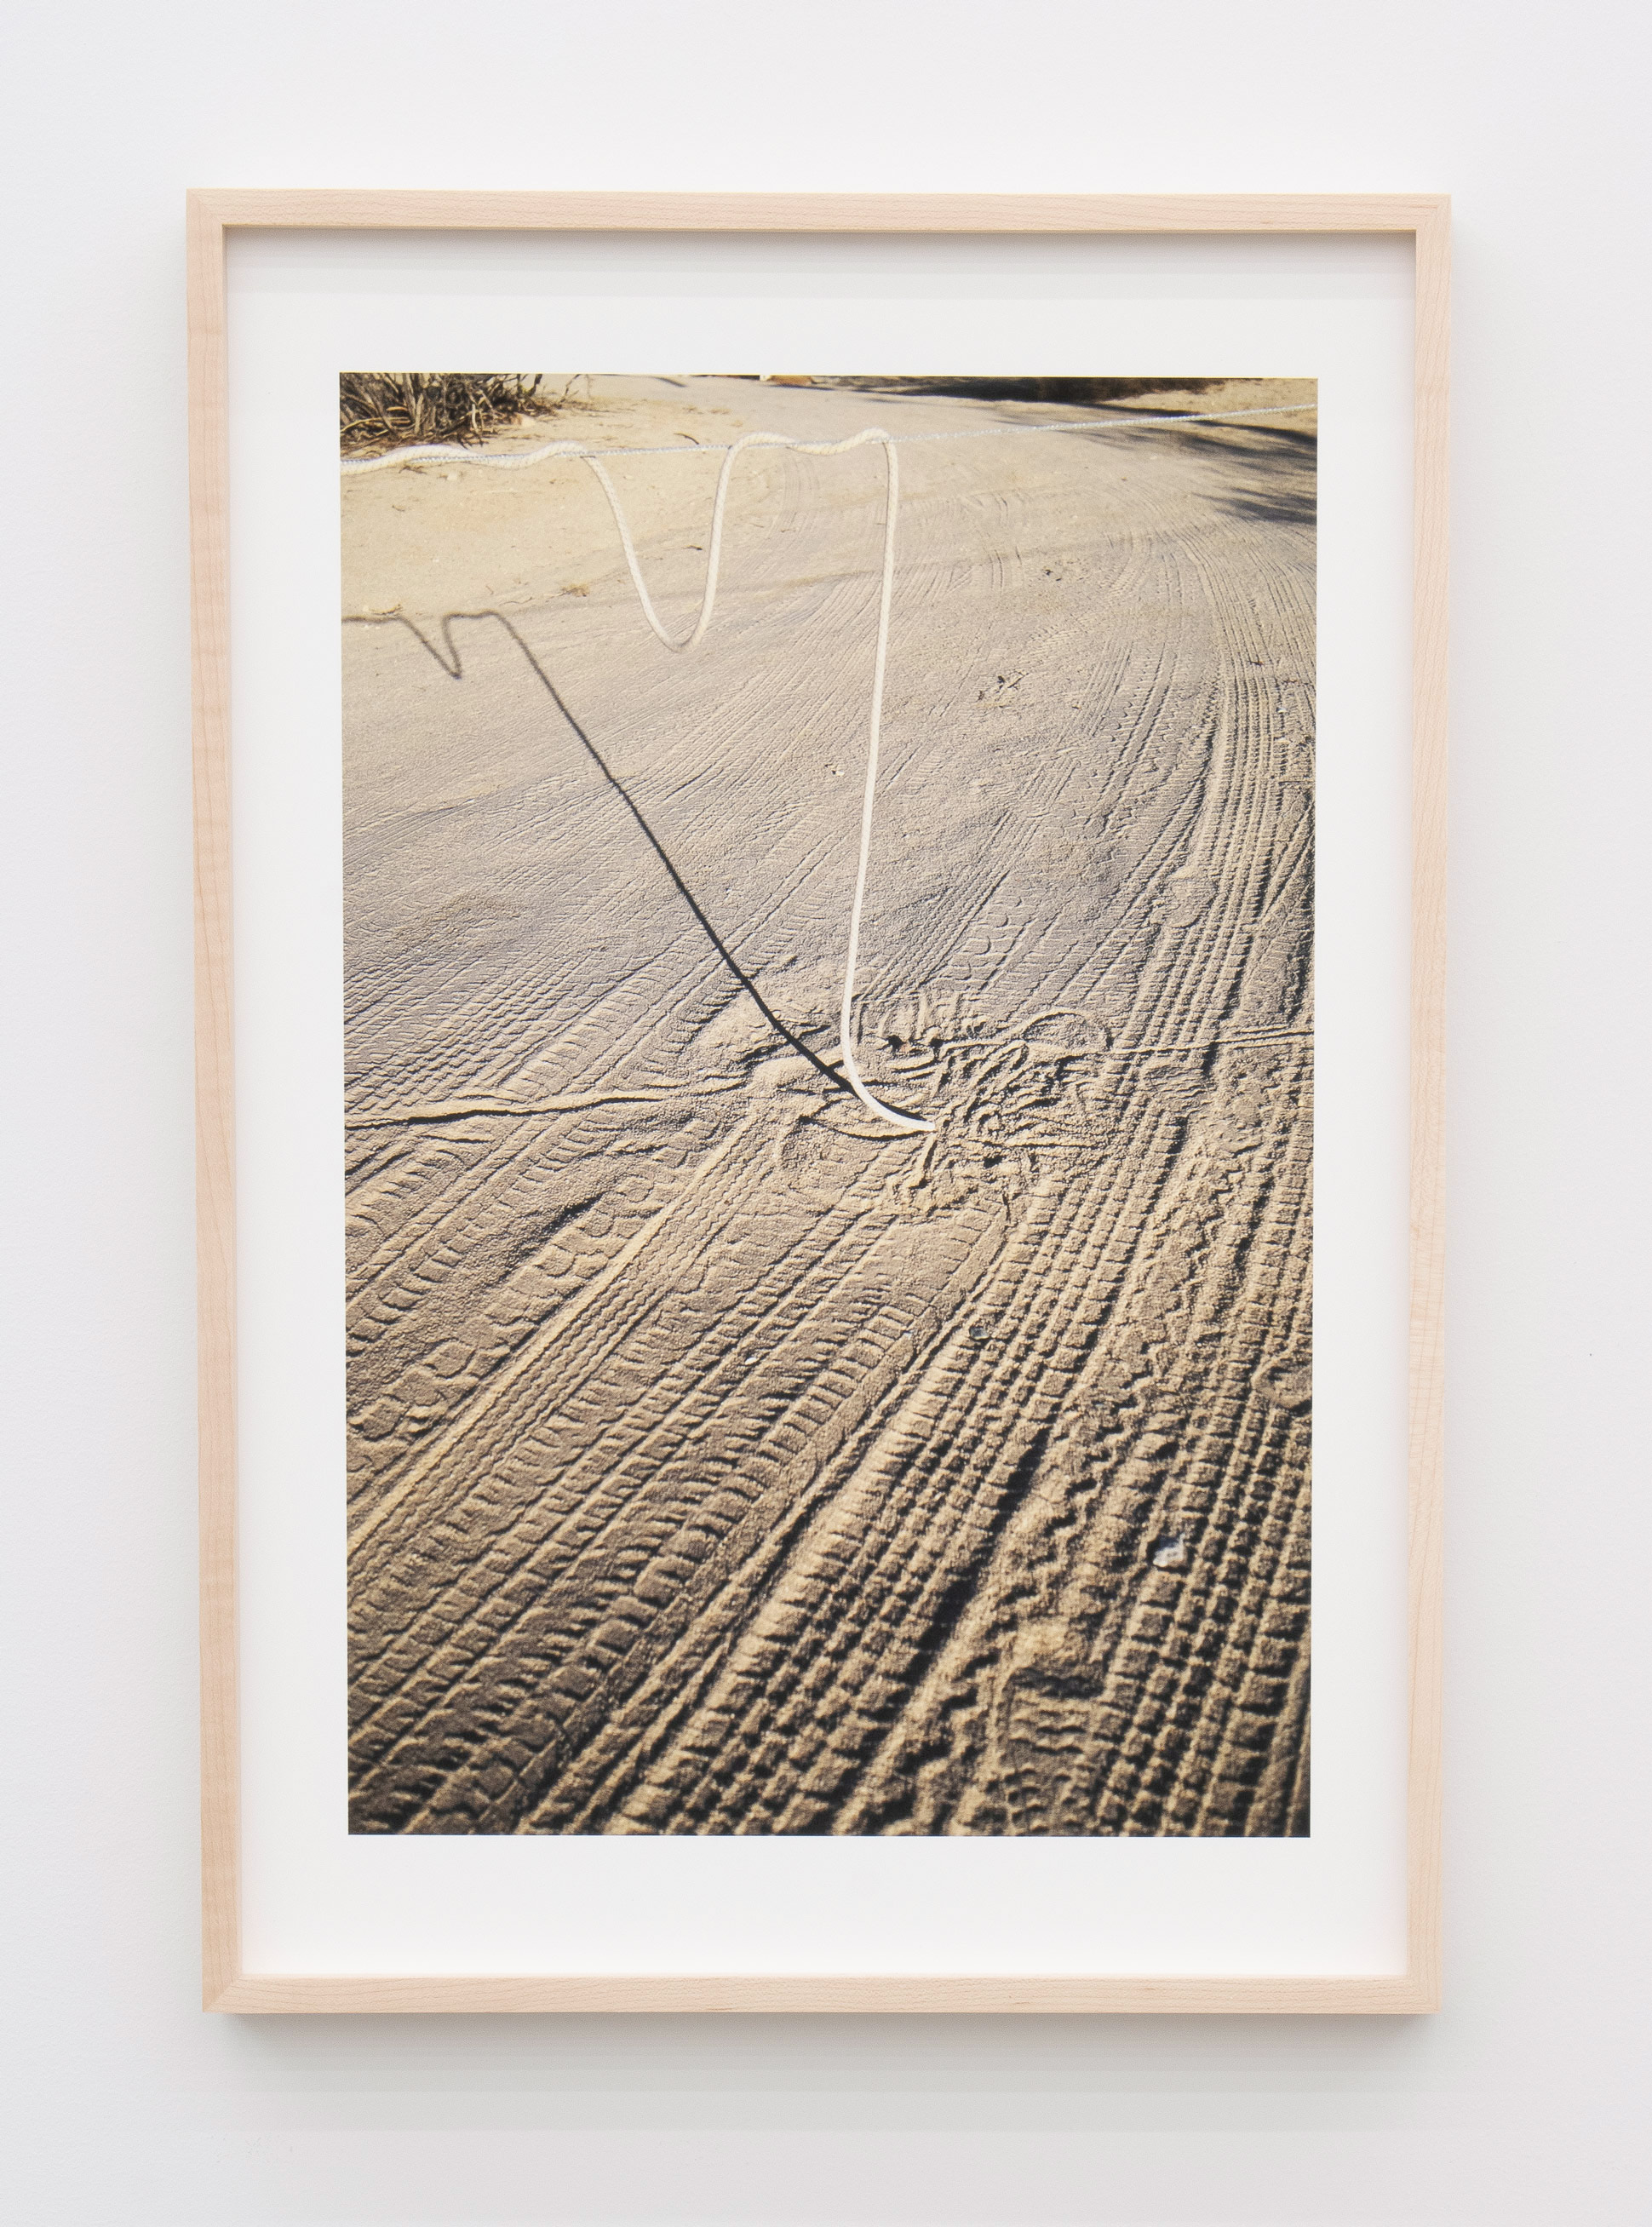 Jennifer Bolande, Lines in the Sand, 2023, Archival pigment print, 19 x 13 in.